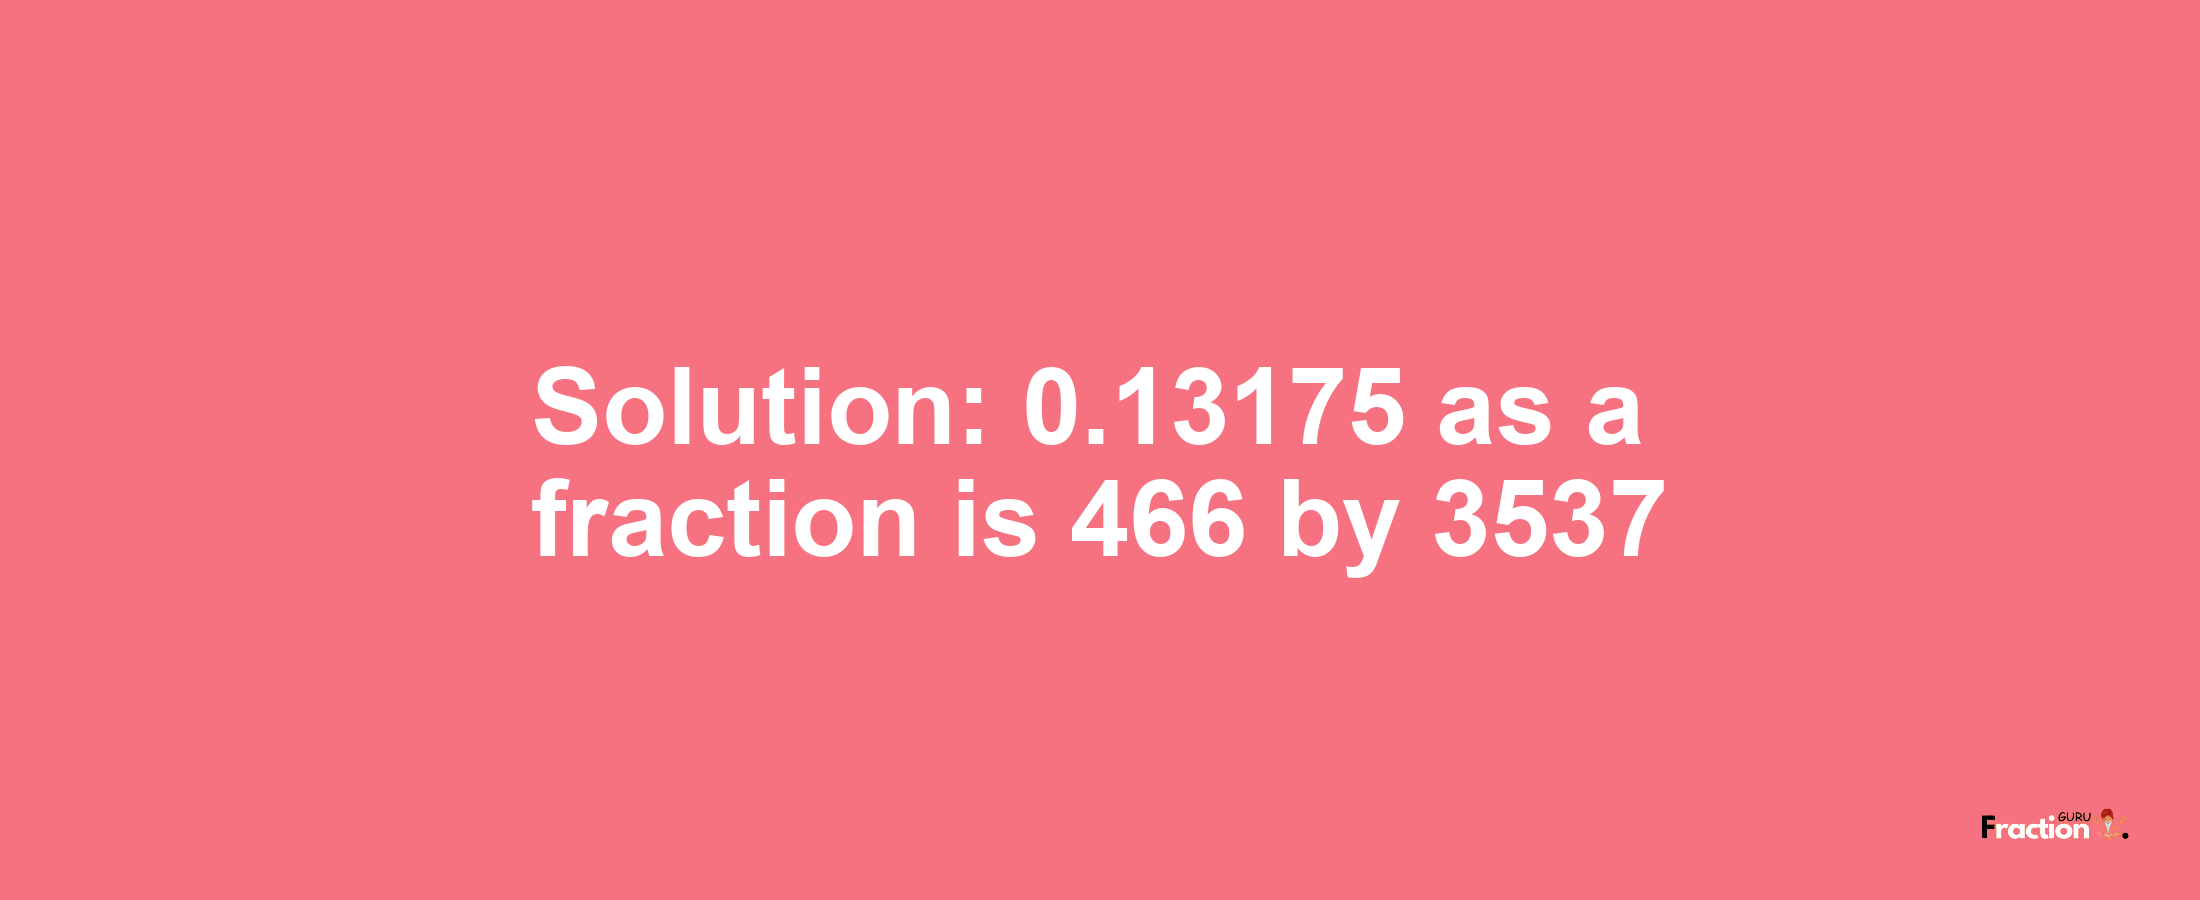 Solution:0.13175 as a fraction is 466/3537